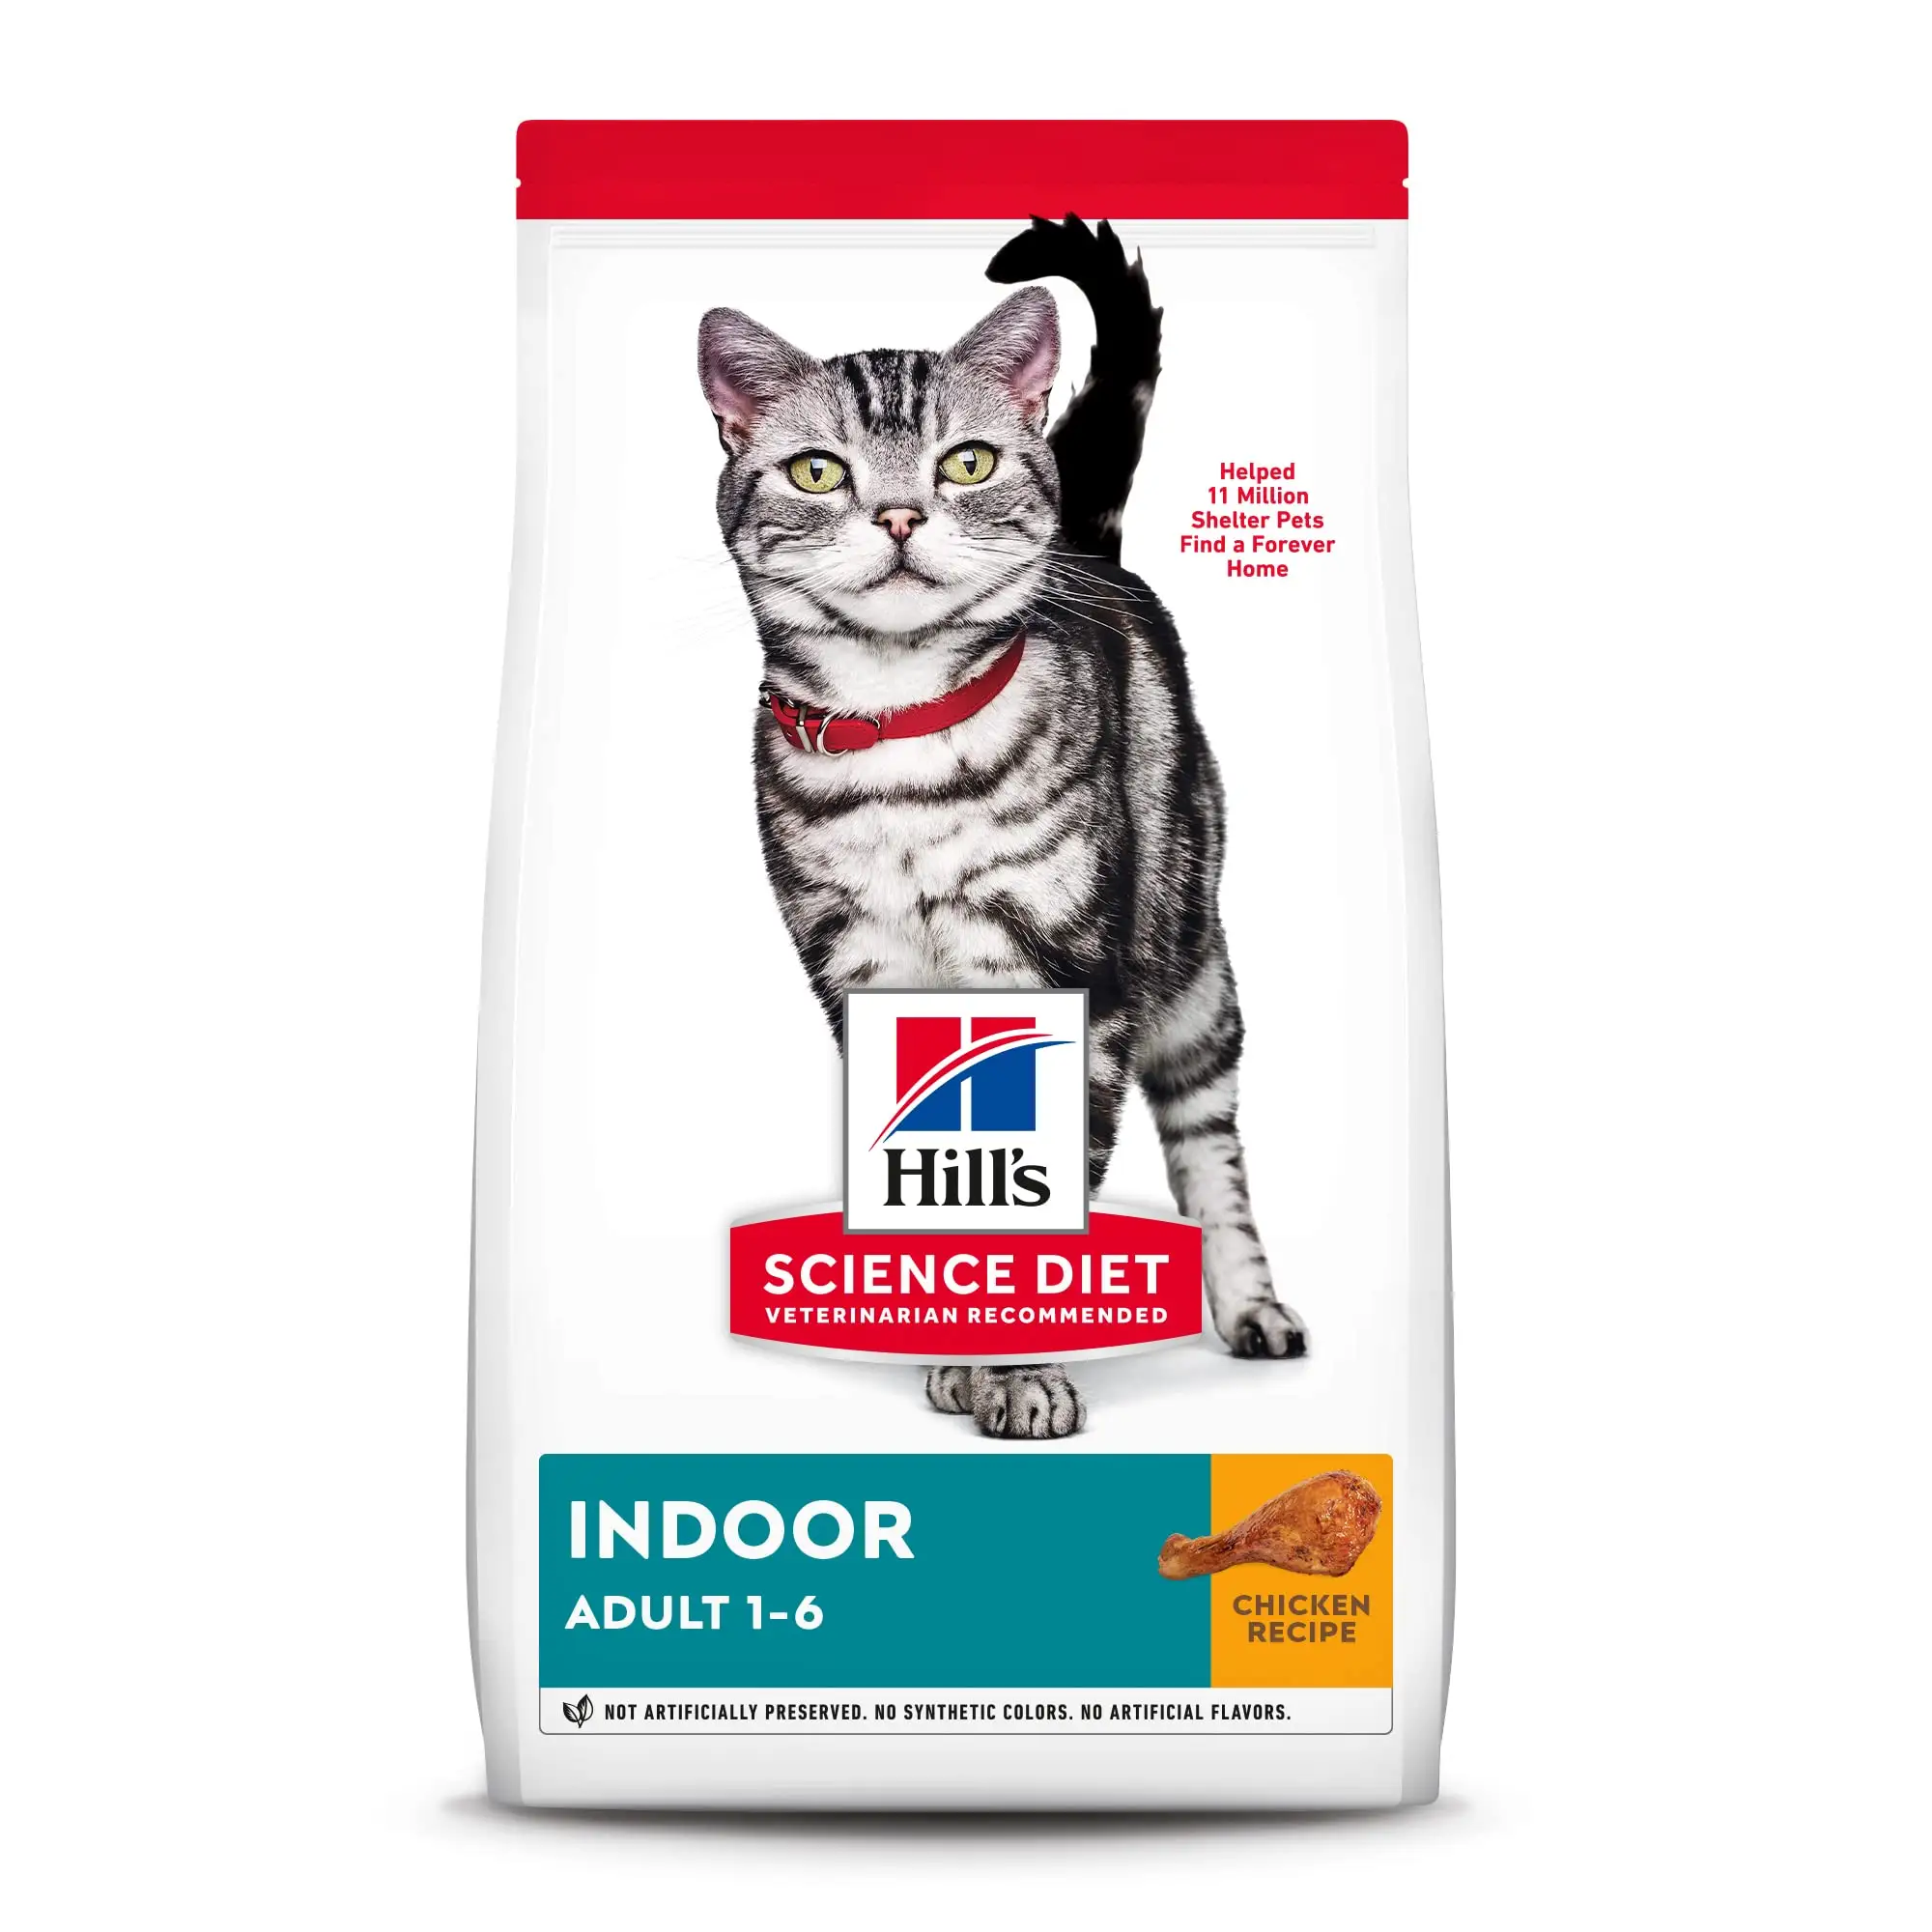 buy wholesale Dry Cat Food, Adult, Chicken Recipe, 7 lb. Bag where to buy wholesale Dry Cat Food in bulk cheap